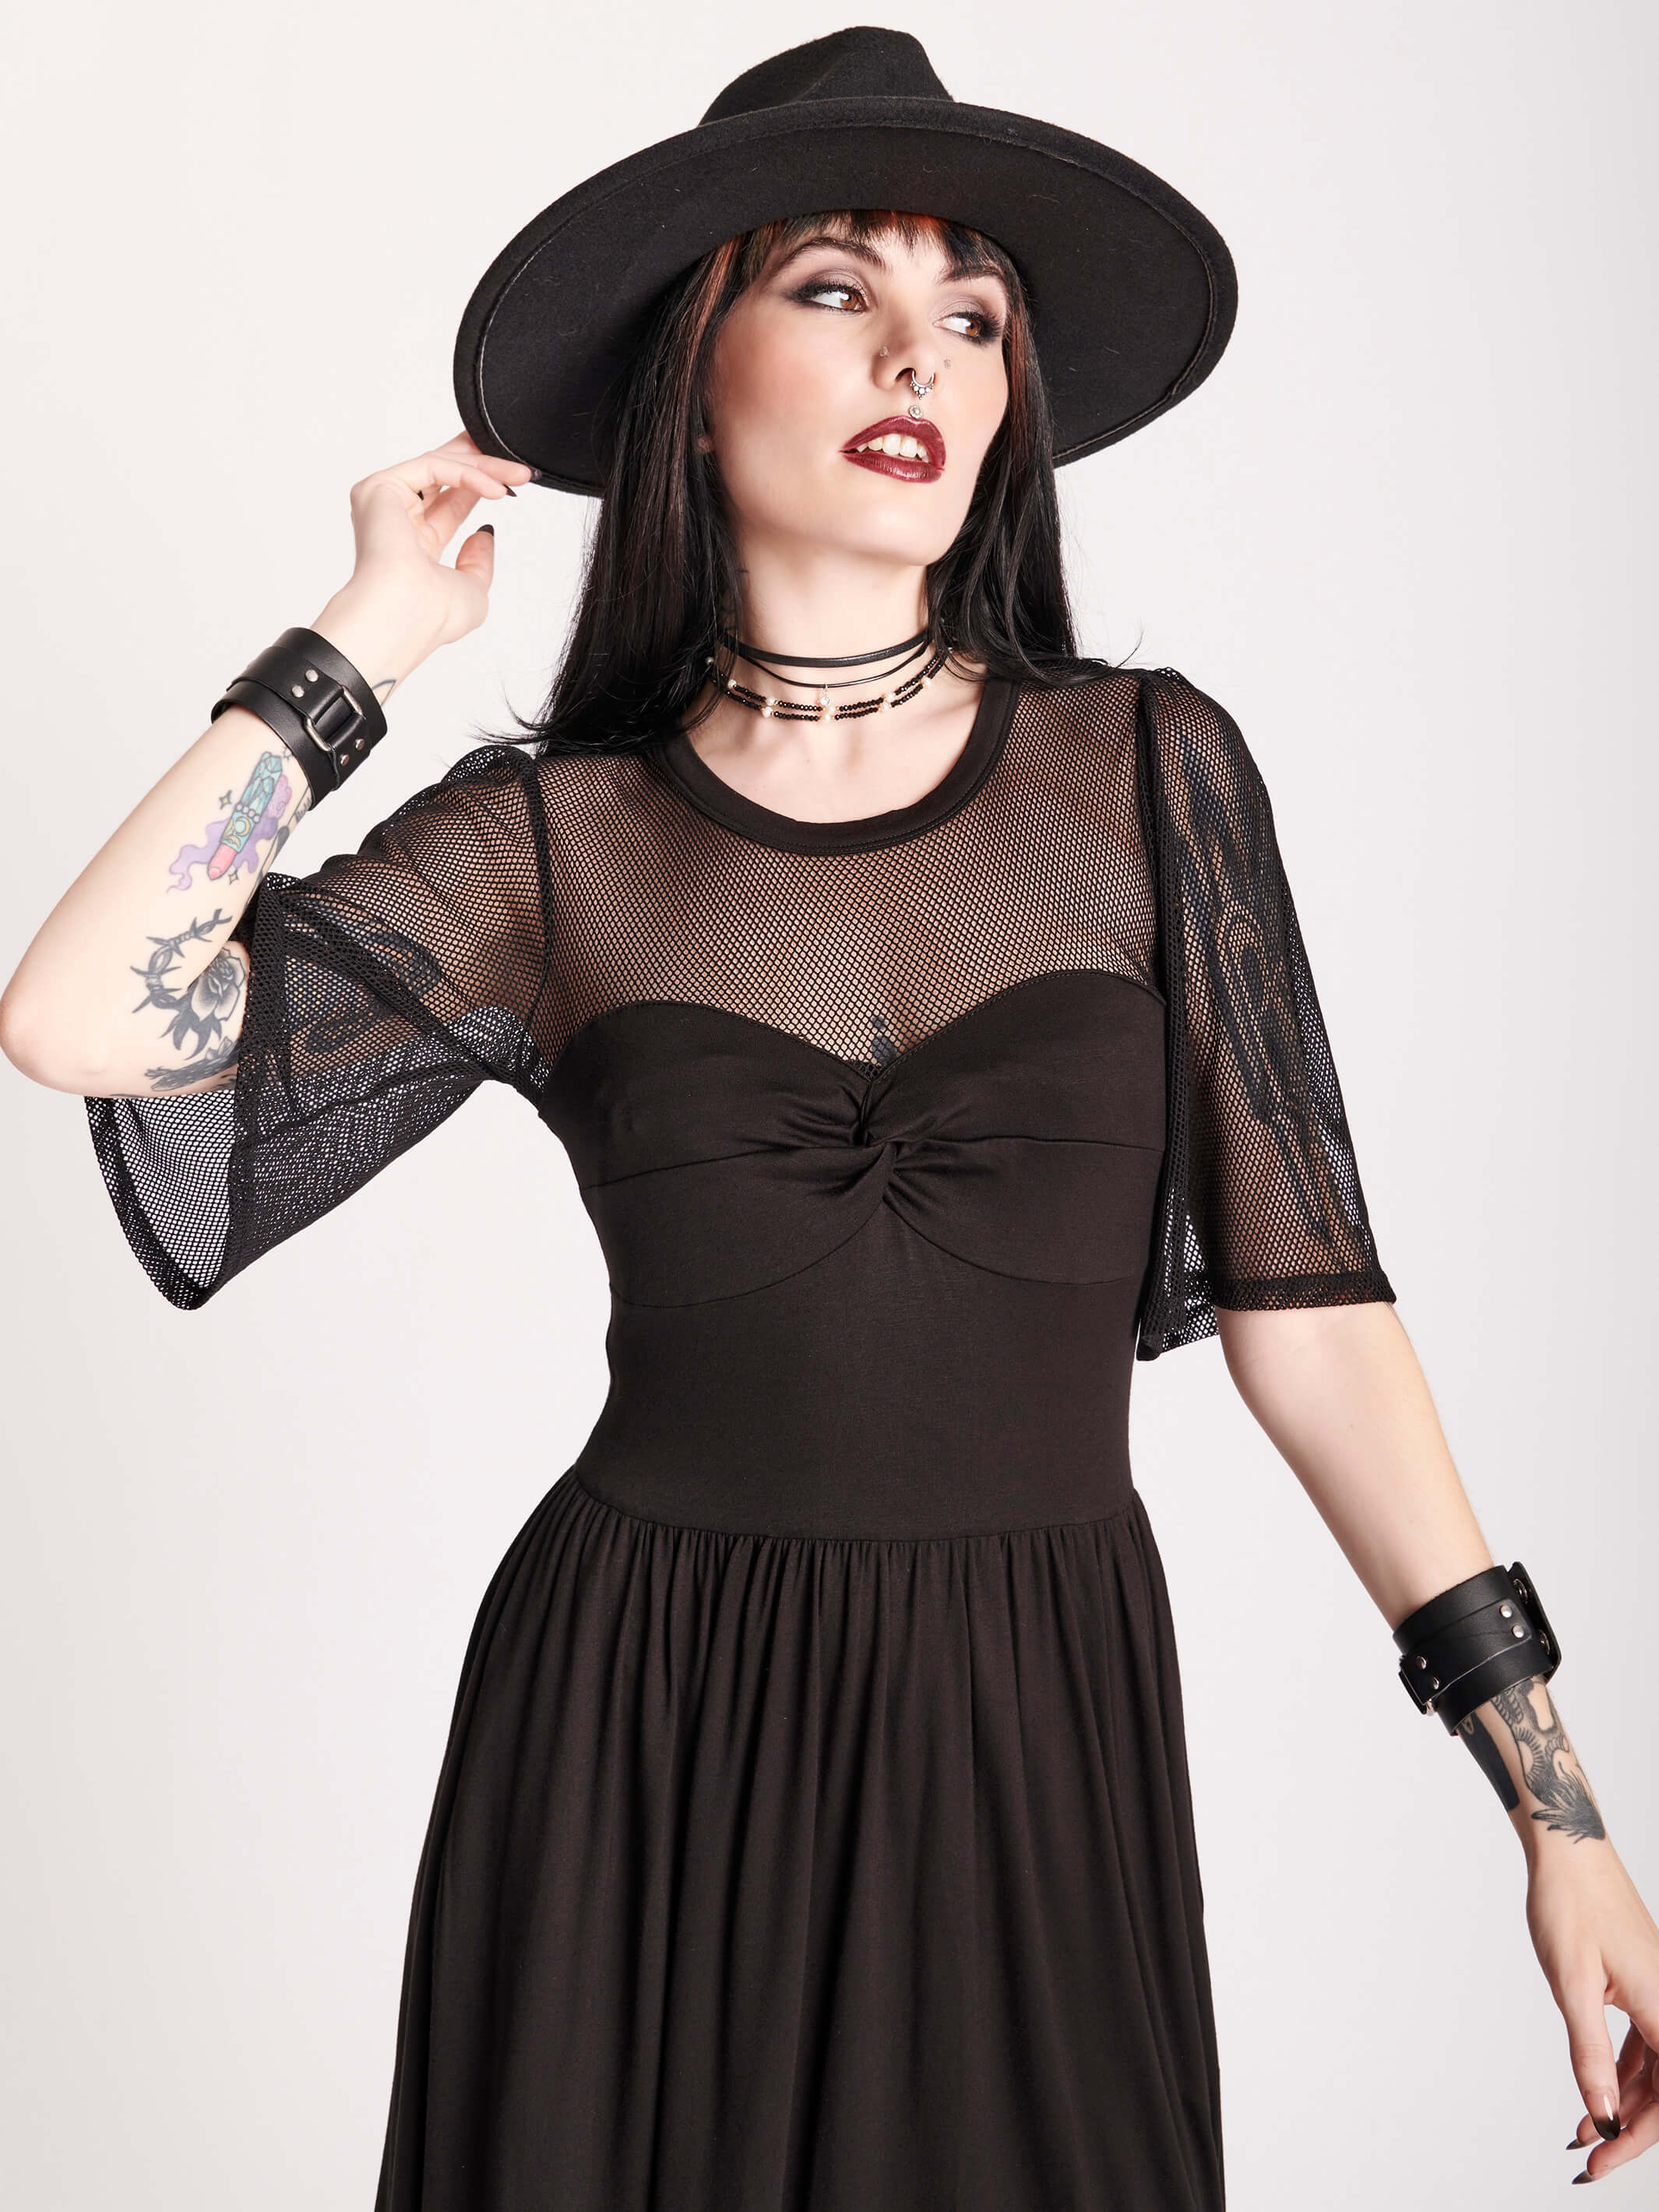 ELBOW LENGTH SLEEVES, MESH YOKE AND KNOTTED FRONT DETAIL